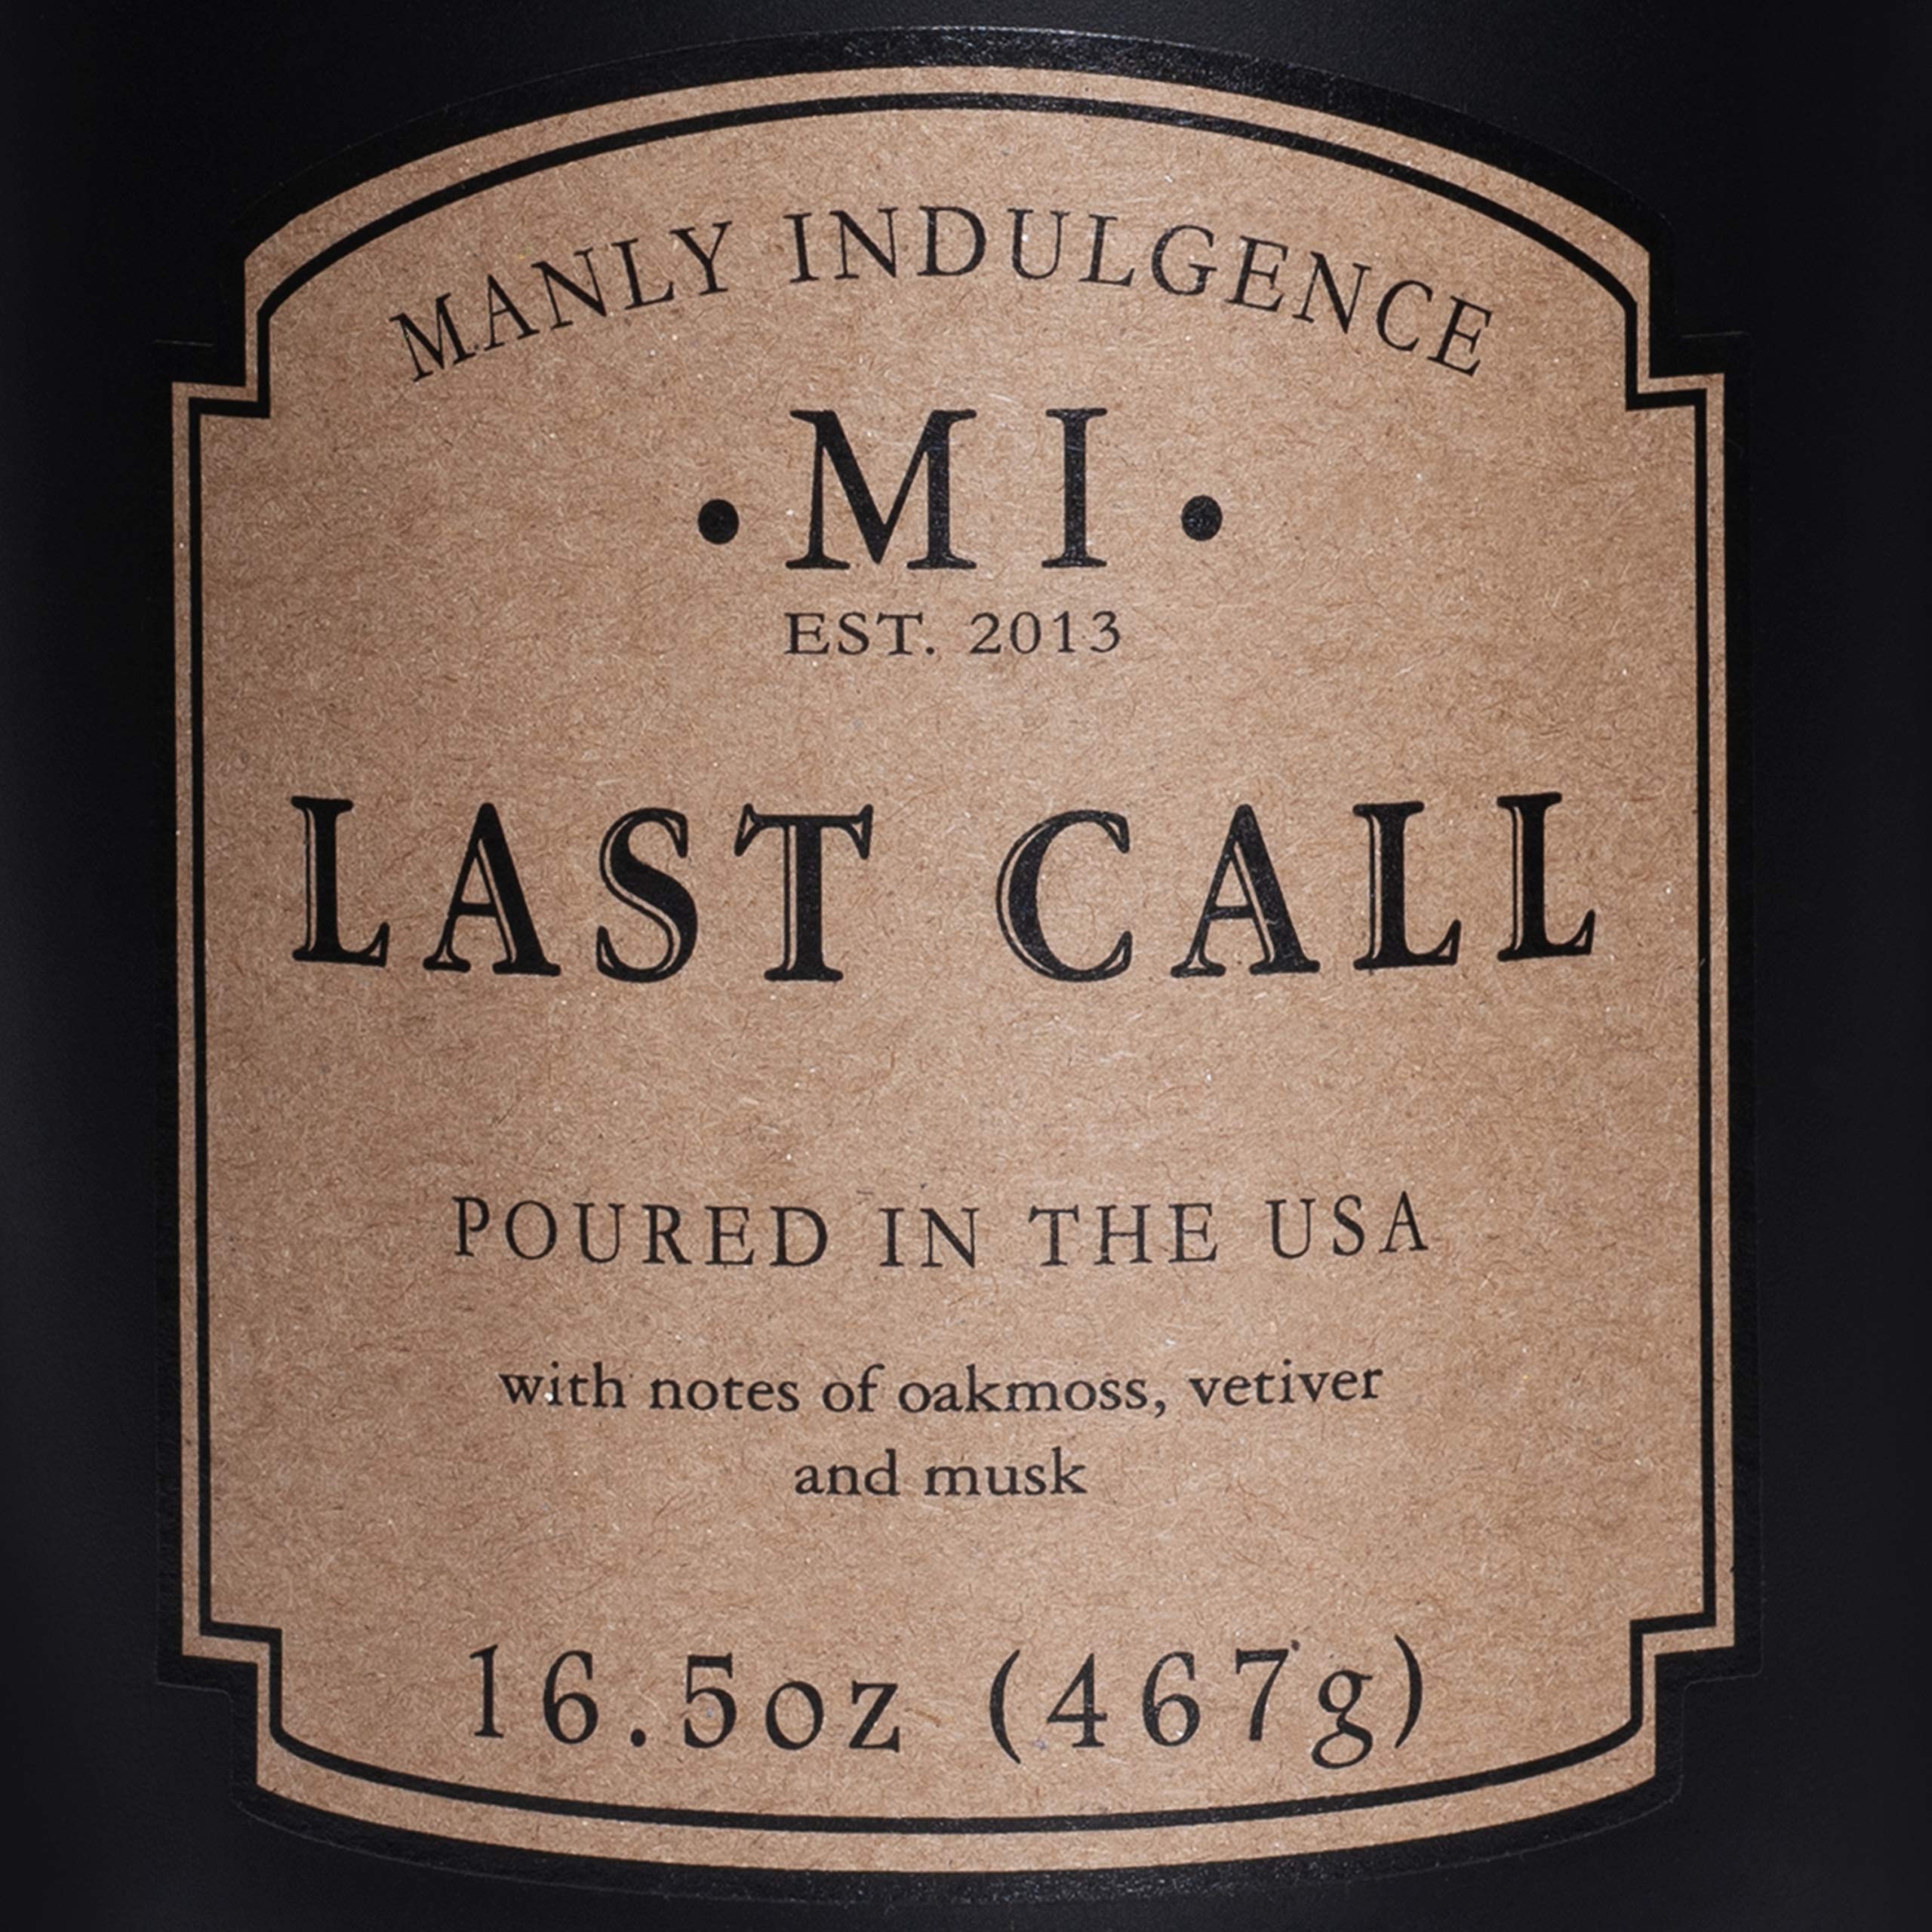 Manly Indulgence Last Call Scented Jar Candle for Men 16.5 oz - Woodsy Vetiver, Oakmoss - Citrus & Spicy Hints - Eucalyptus - Up to 60 Hour Burn, Soy Blend Wax, USA Poured